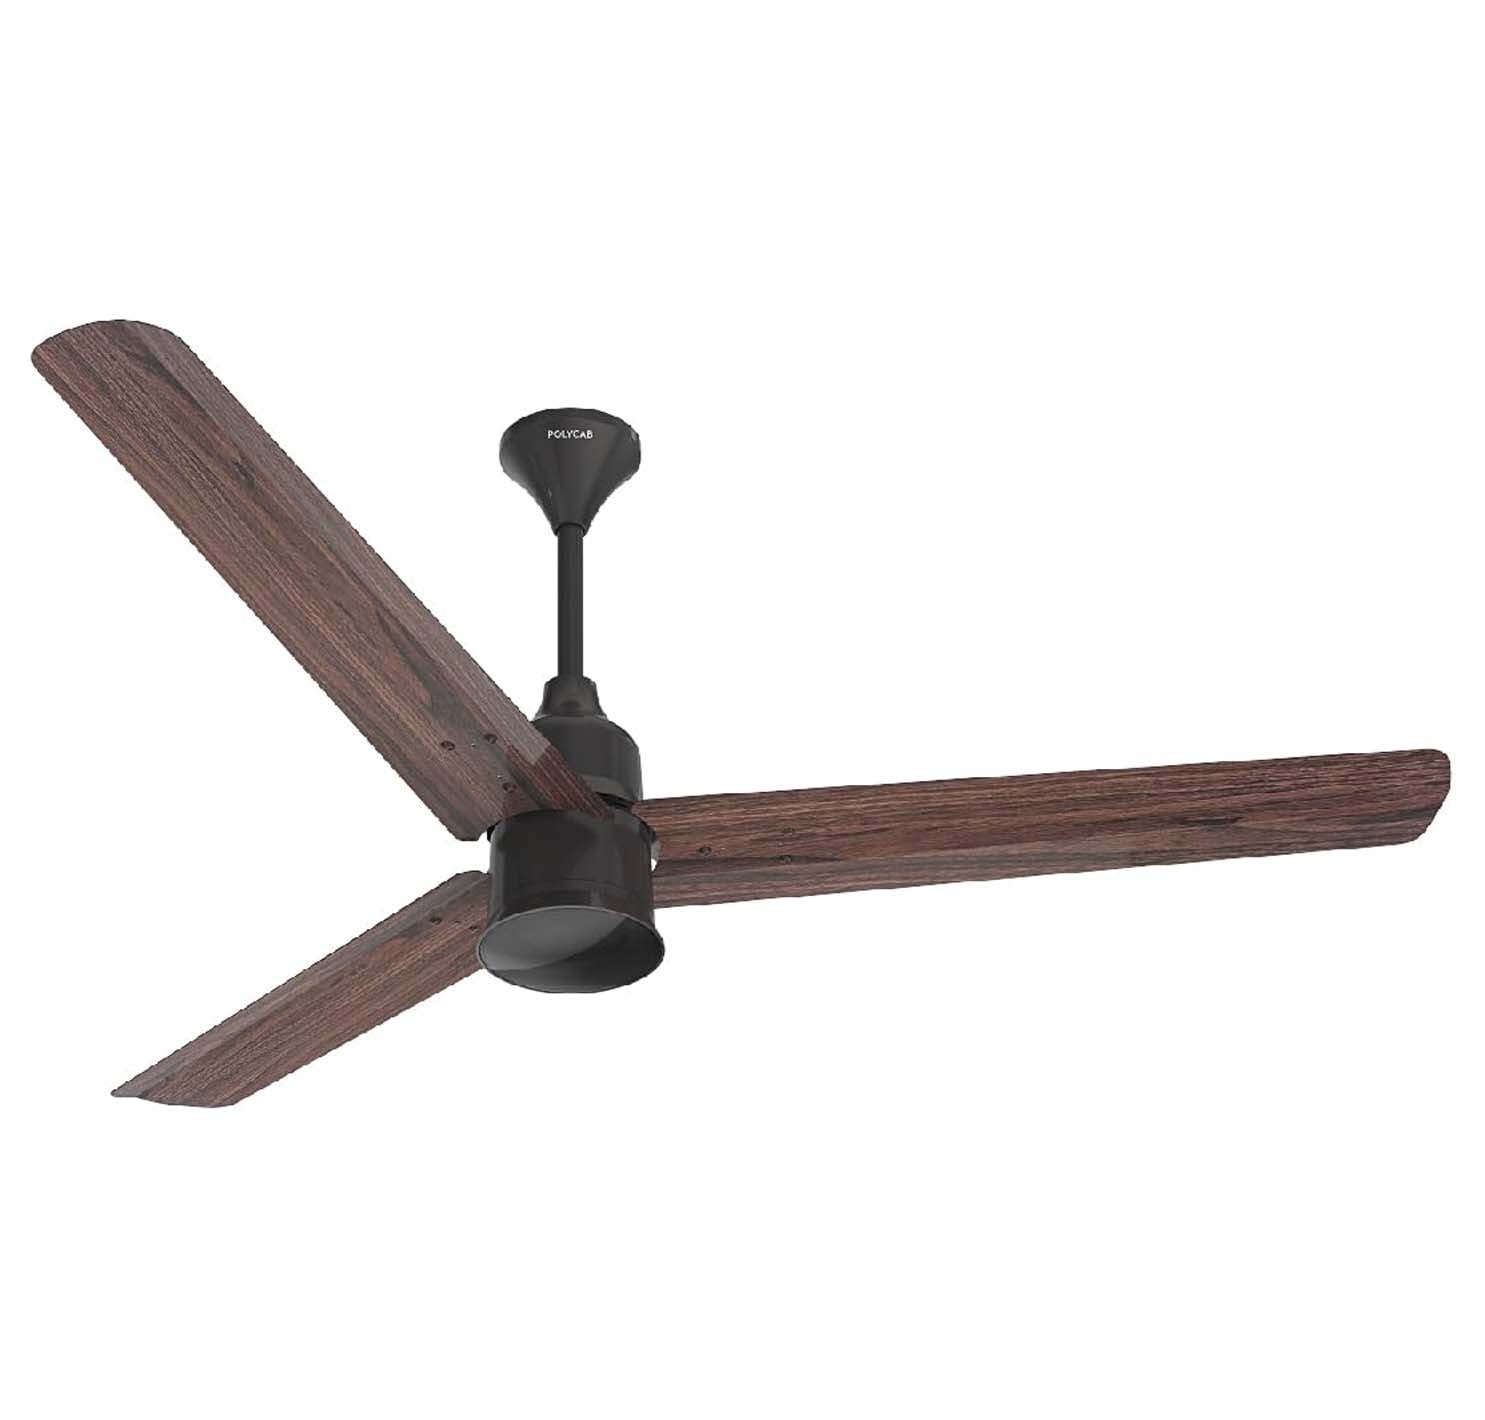 Polycab Silenco Advance BLDC Mini Ceiling Fan With 5 Star Rated - 1200mm - Natural Walnut Wood